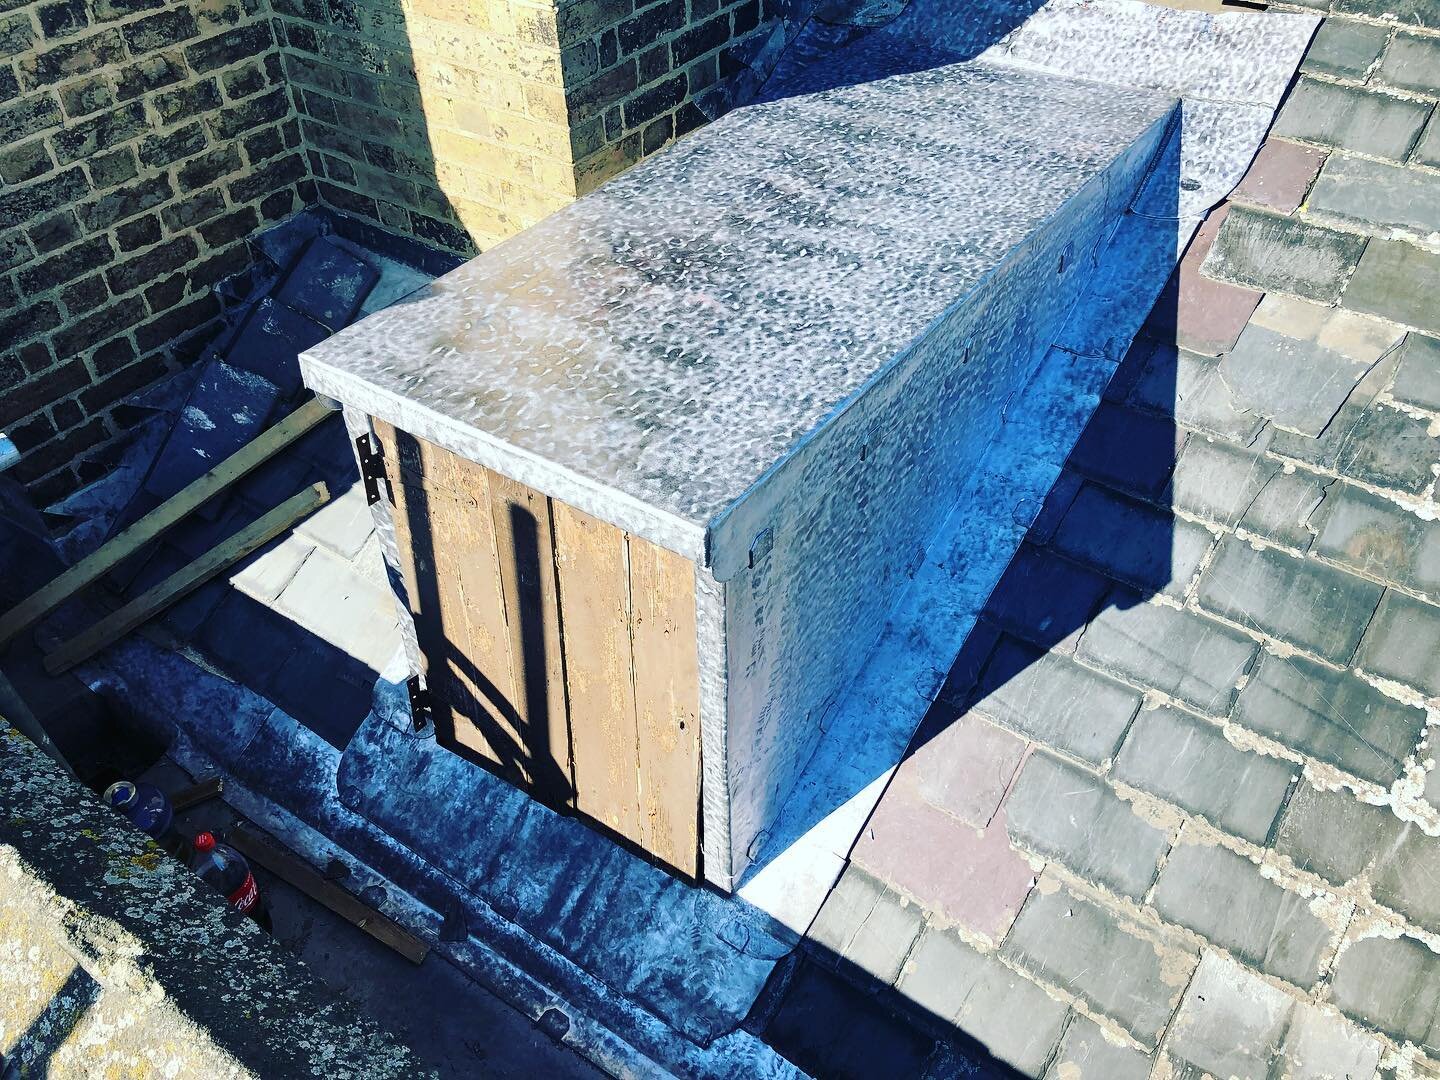 New Sandcast lead dormer replacement, with new side cheeks and front apron detail, 📞07983131947 #leadroof #leadroofing #leadroofer #leadroofers #sandcastlead #leadwork #leadworkers #leadworkers #leadspecialist #leadburning #leadbossing #leadworkspec